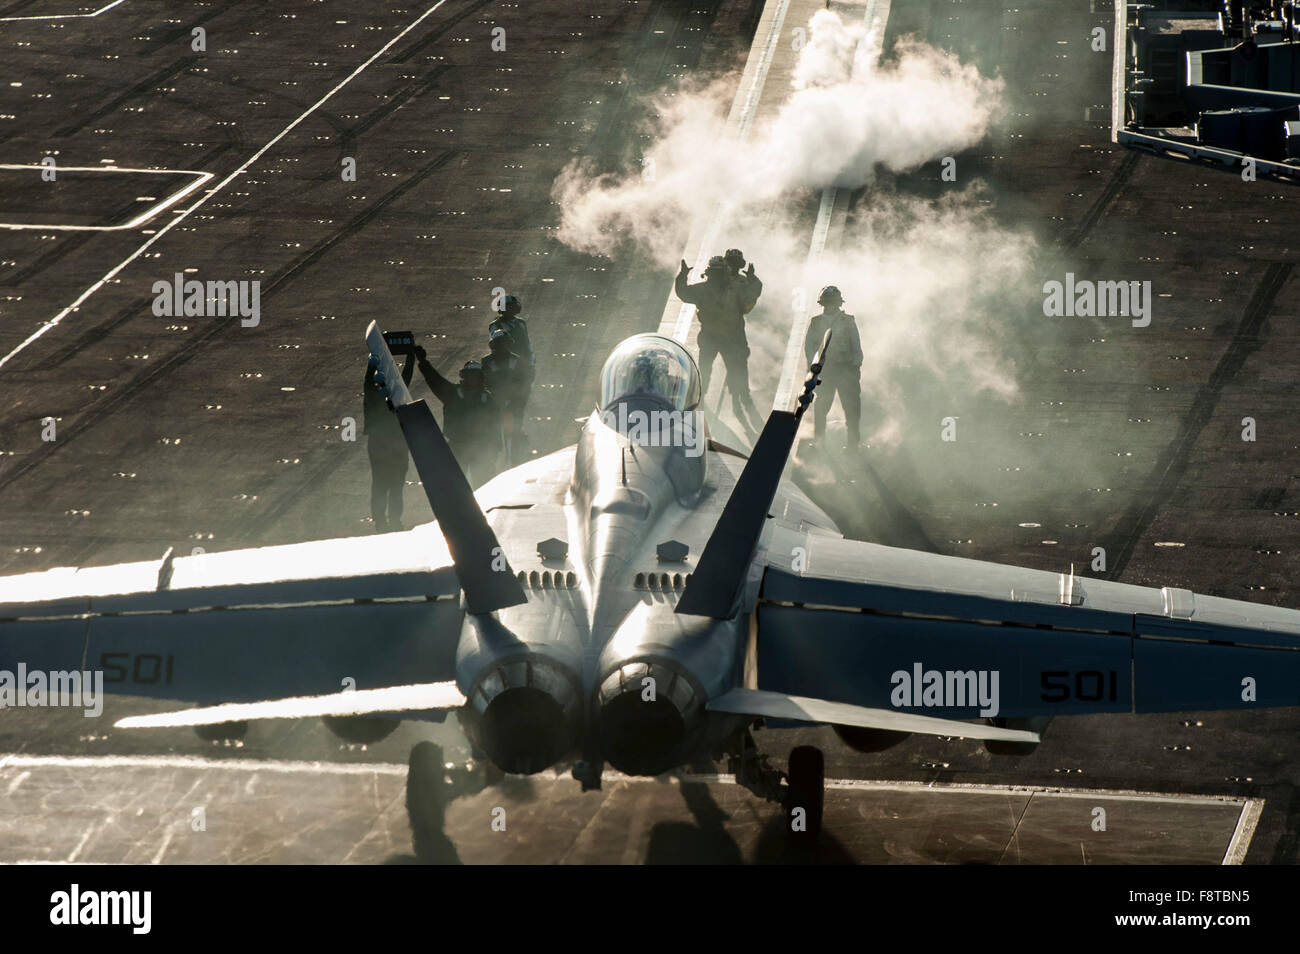 Sailors direct an EA-18G Growler, assigned to the “Patriots” of Electronic Attack Squadron (VAQ) 140, on the flight deck of aircraft carrier USS Harry S. Truman (CVN 75). Stock Photo